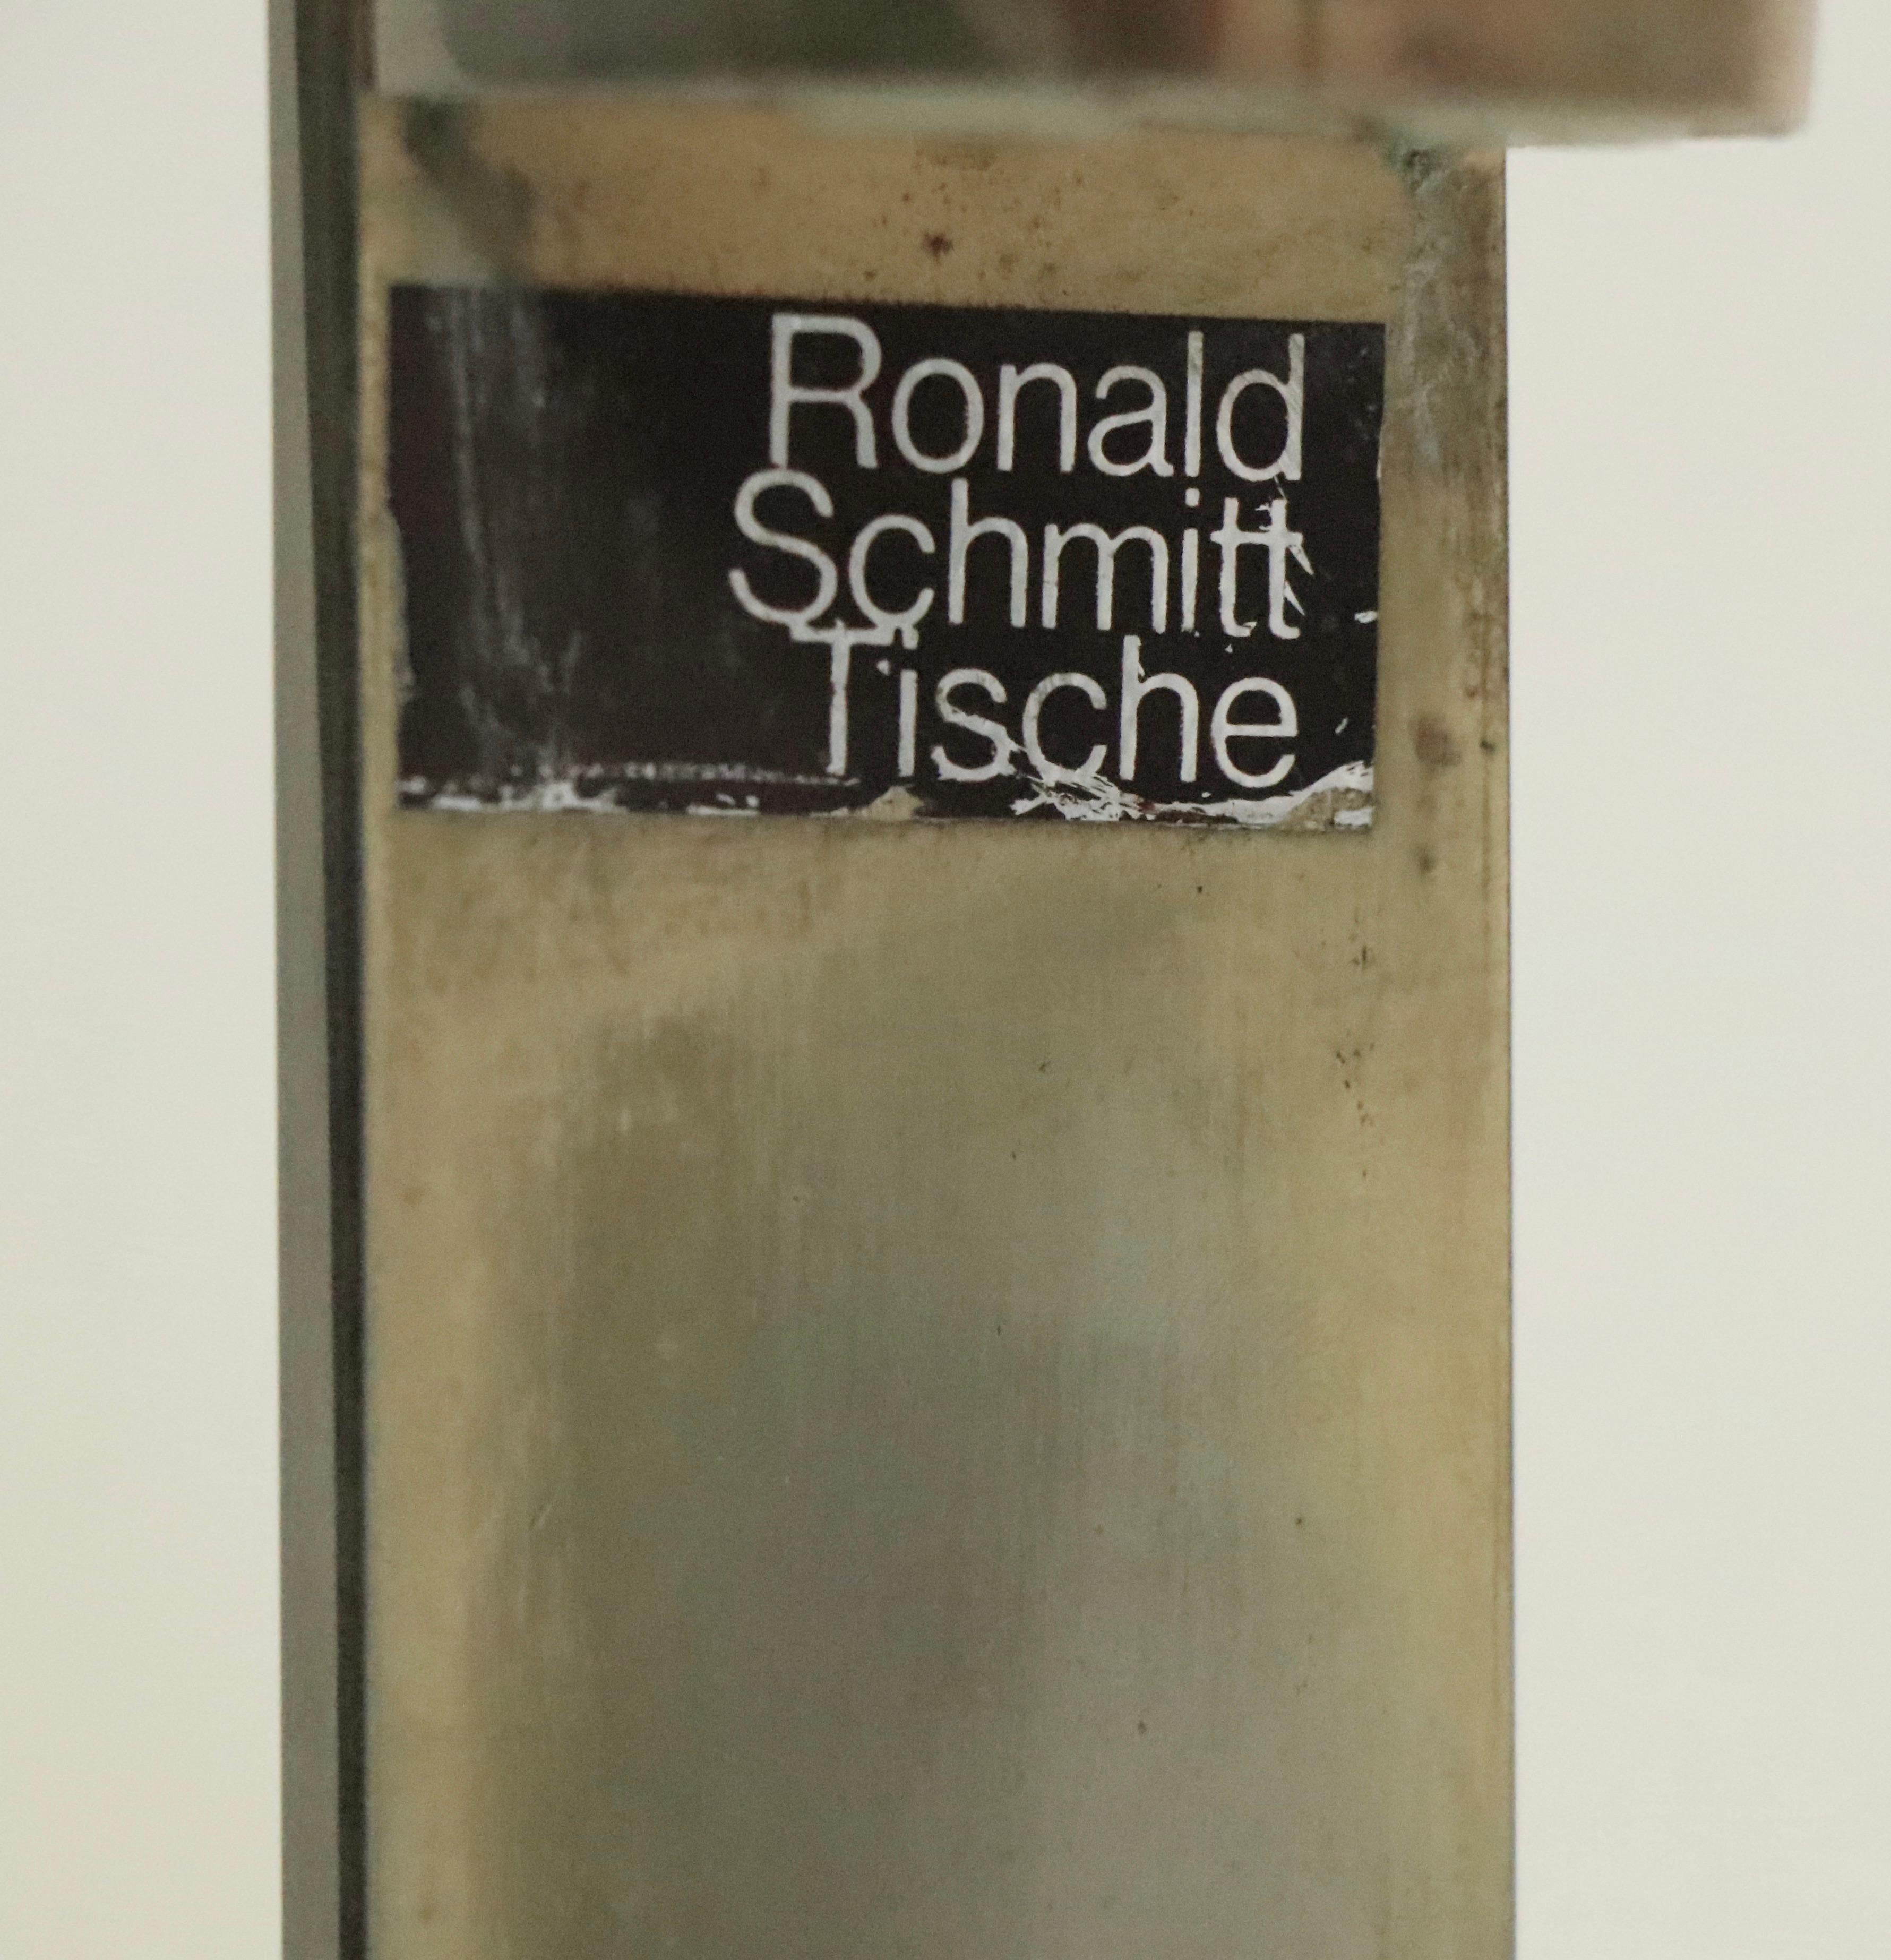 Steel and Glass Nesting Tables by Friedrich Moller for Ronald Schmitt Tische In Good Condition For Sale In New York, NY